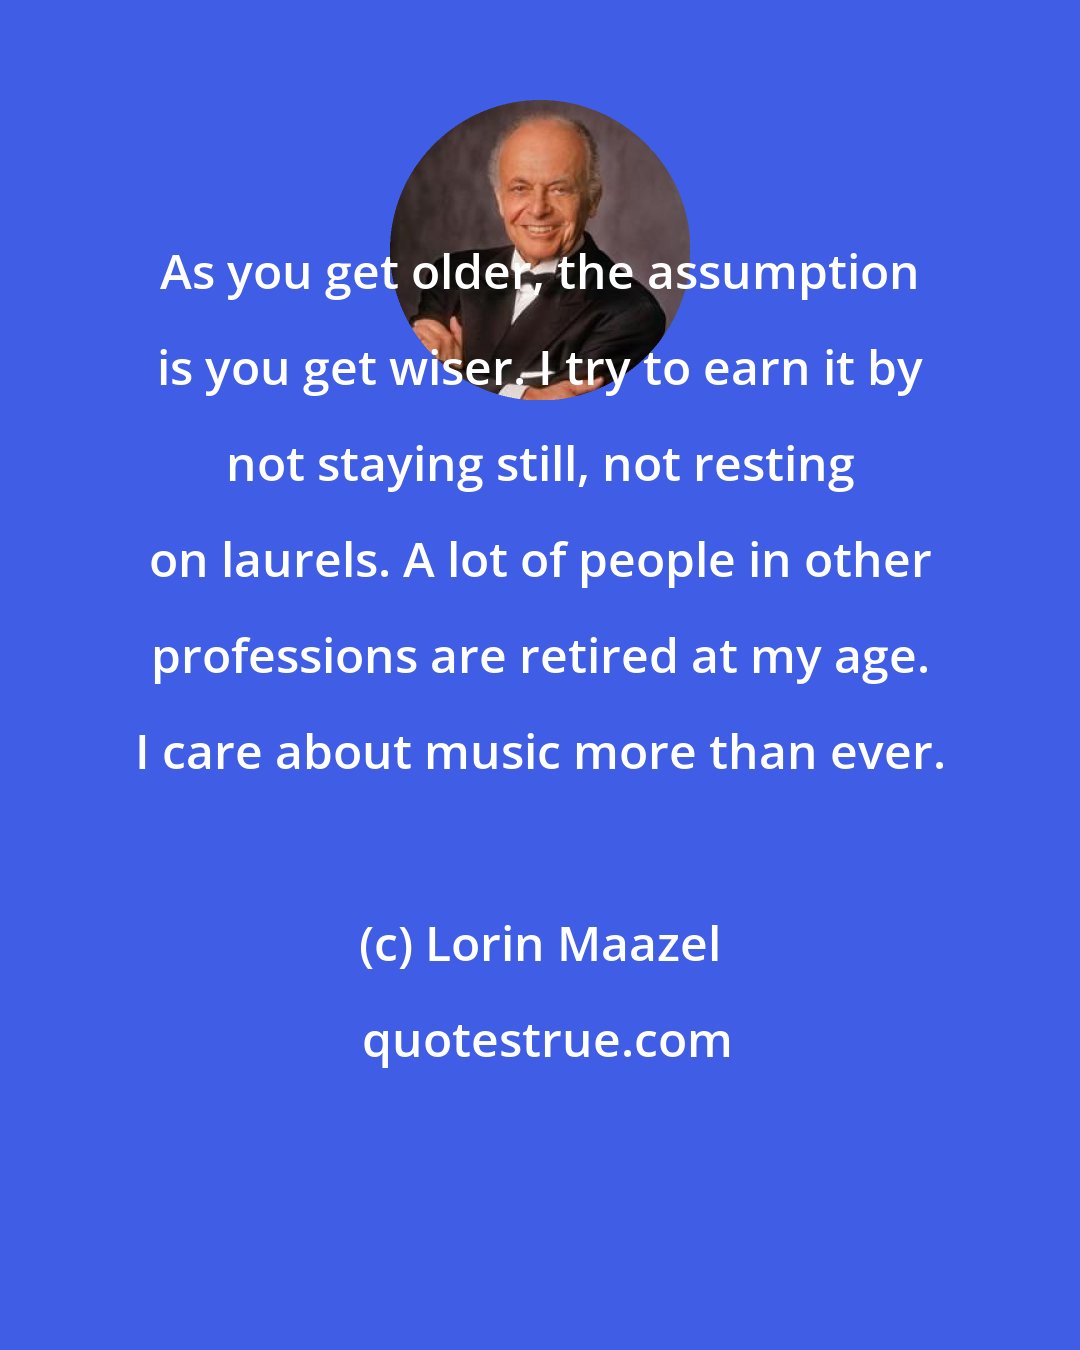 Lorin Maazel: As you get older, the assumption is you get wiser. I try to earn it by not staying still, not resting on laurels. A lot of people in other professions are retired at my age. I care about music more than ever.